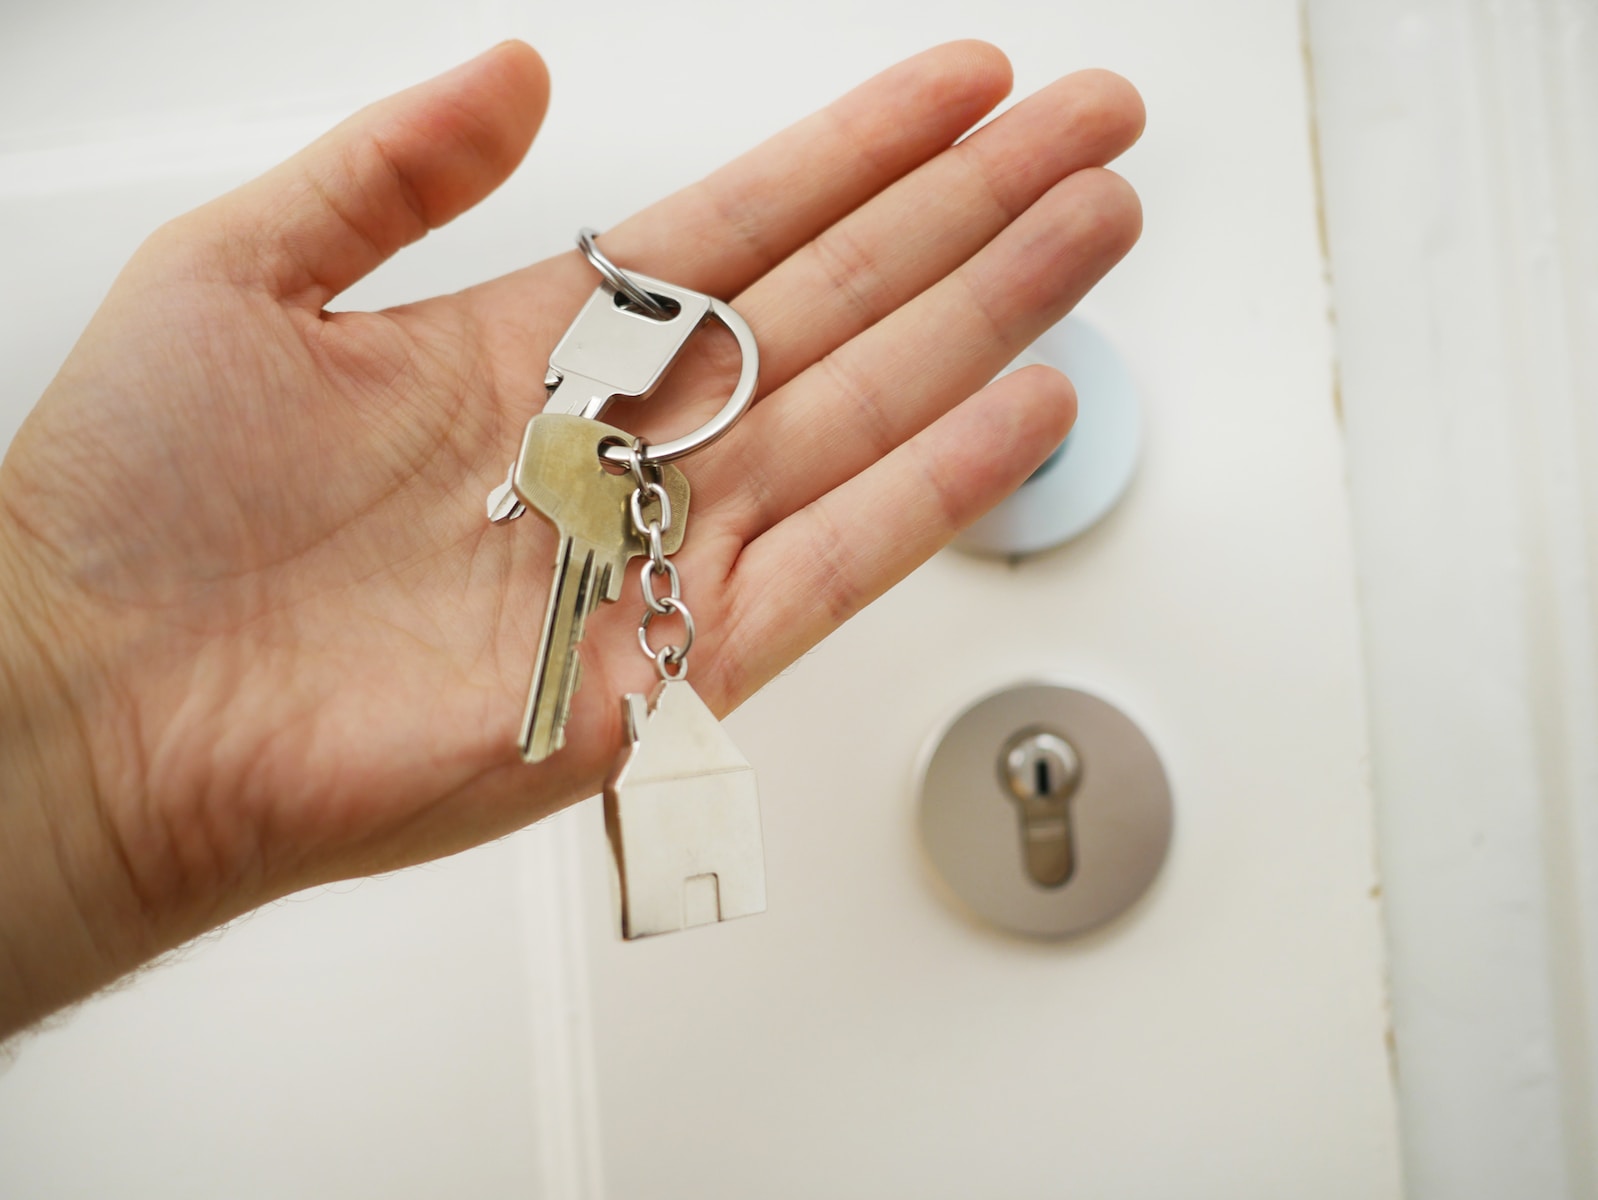 Emergency Locksmith in Charlotte: Getting the Help You Need, When You Need It